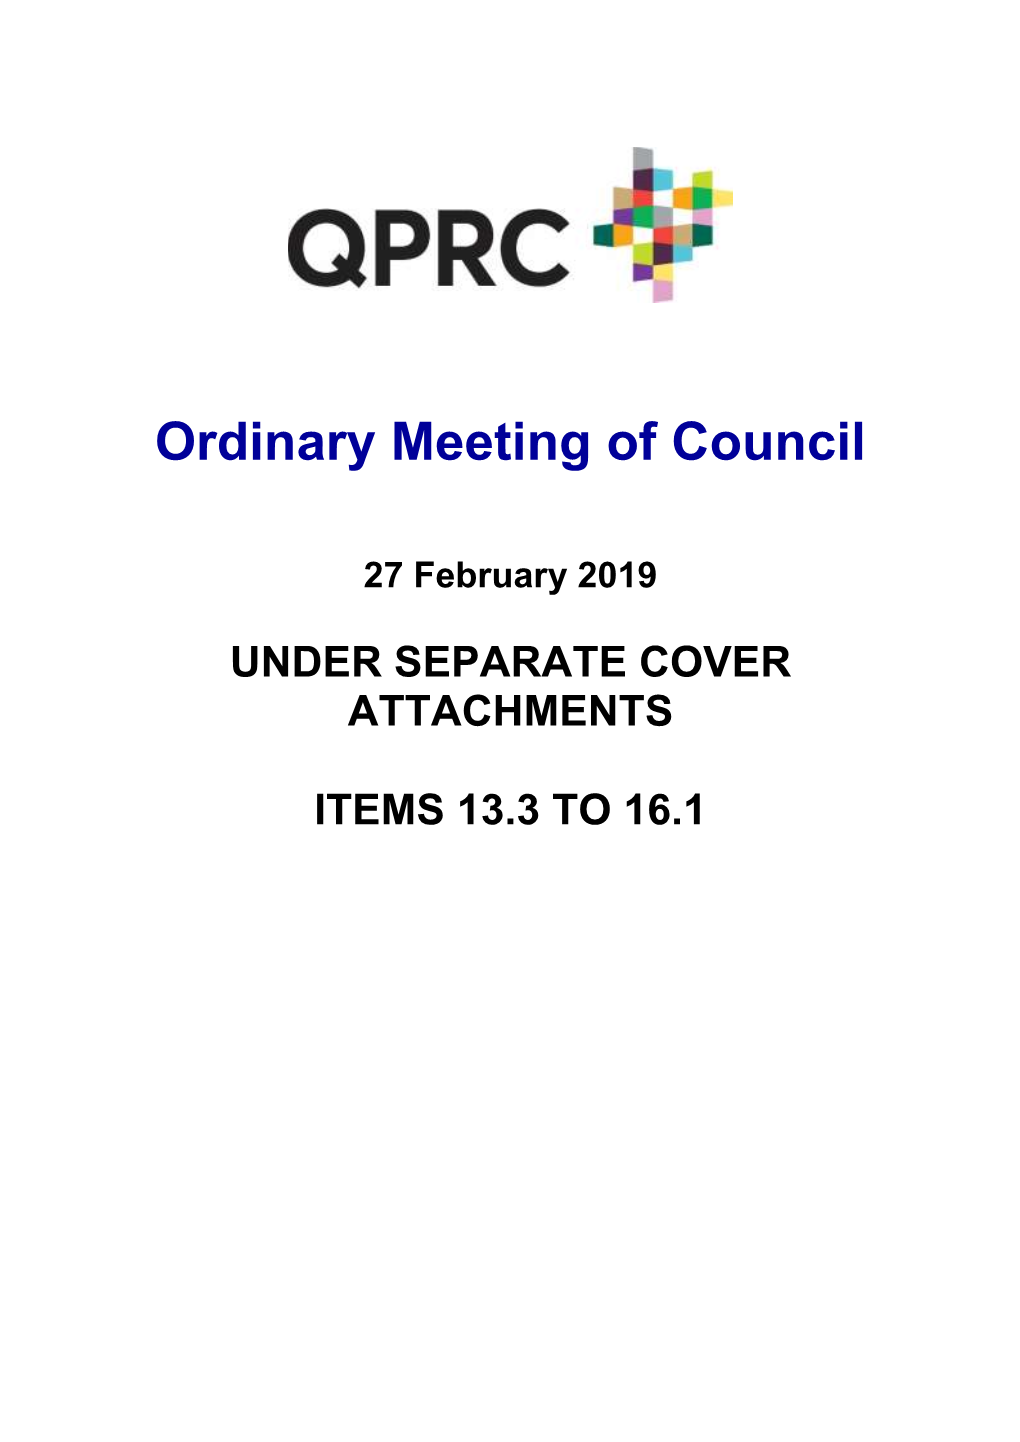 Attachments of Ordinary Meeting of Council